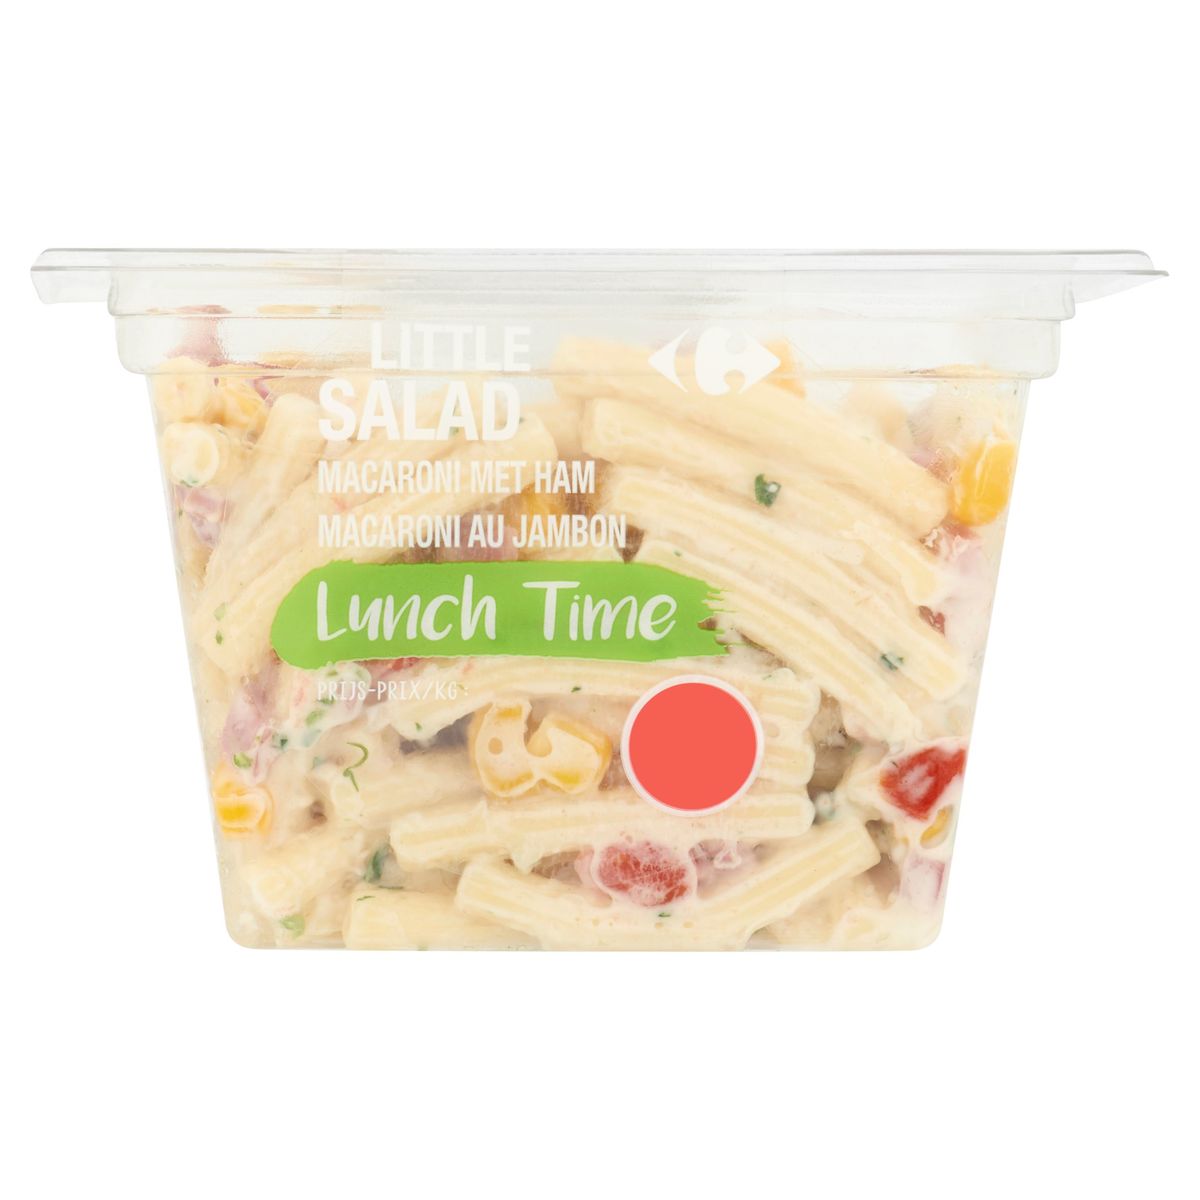 Carrefour Lunch Time Little Salad Macaroni met Ham 250 g